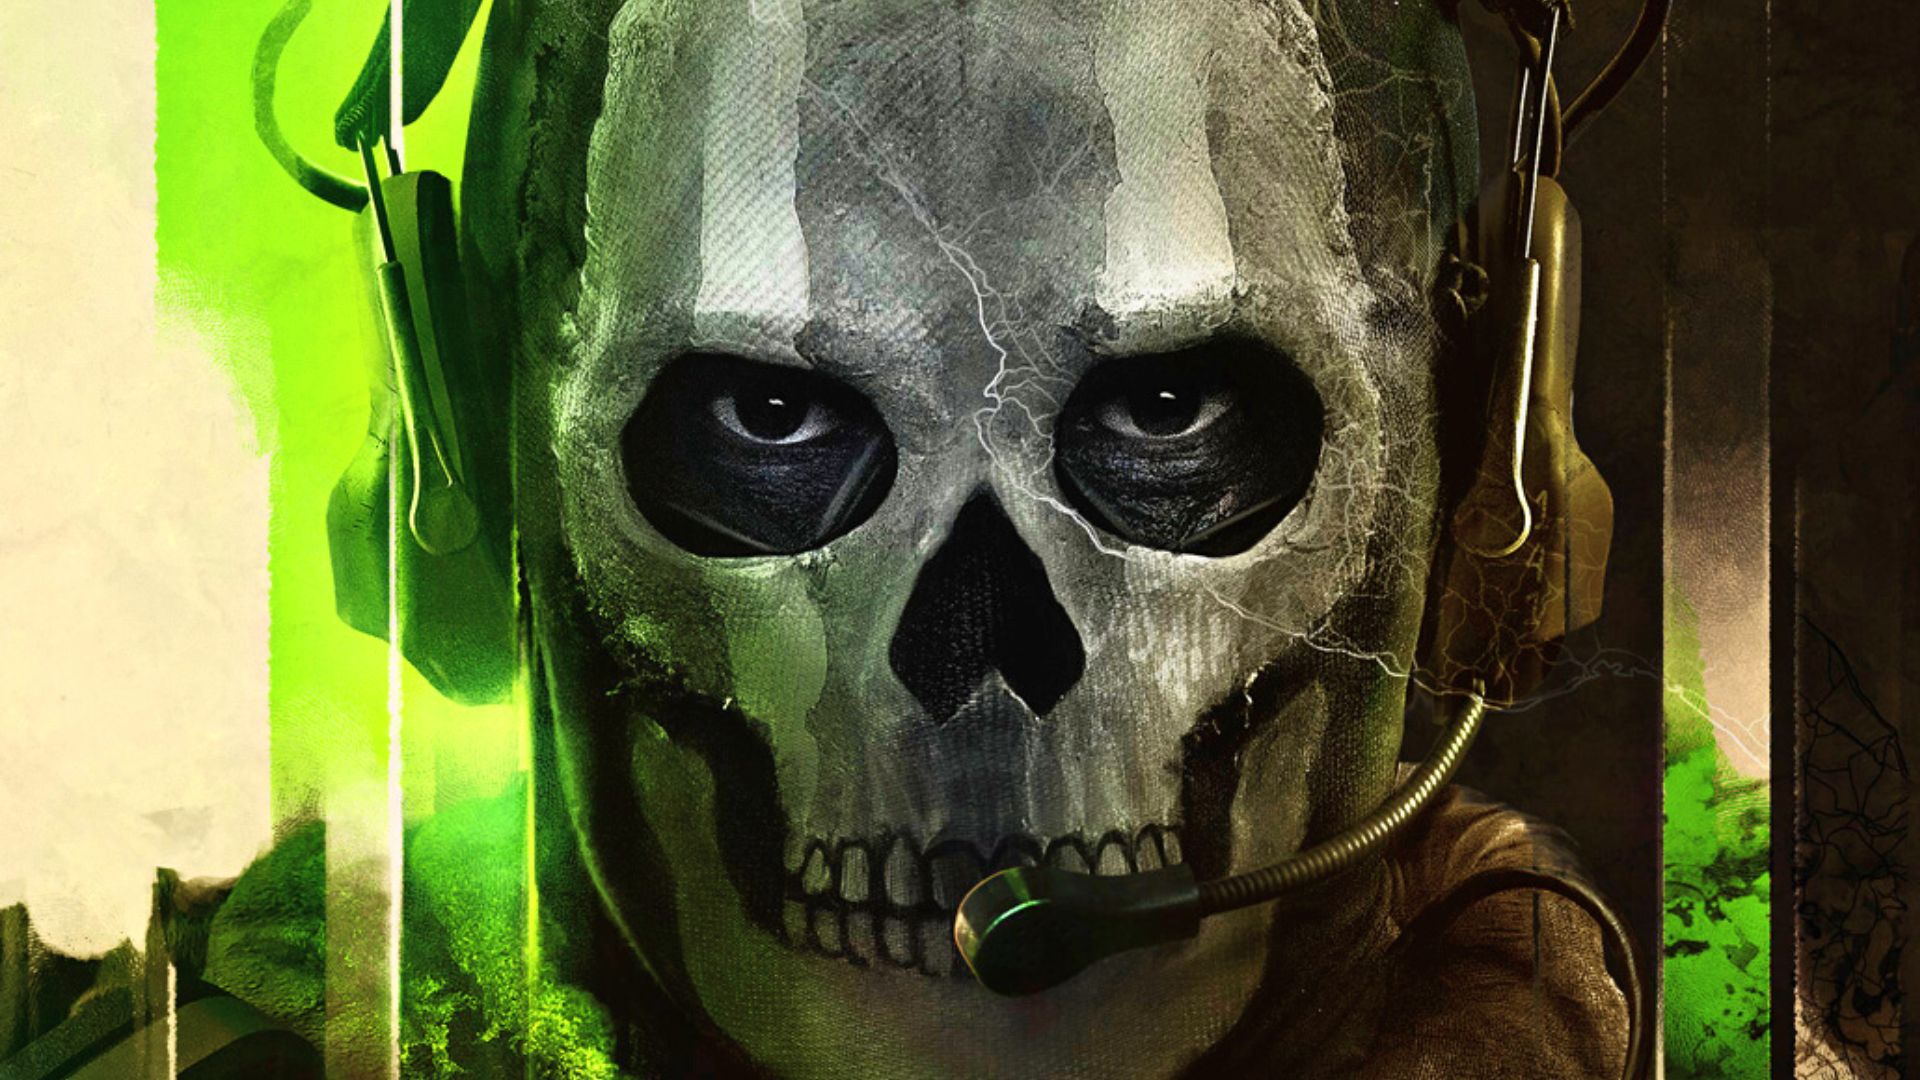 Modern Warfare 2 players furious that Ghost Perk doesn't actually